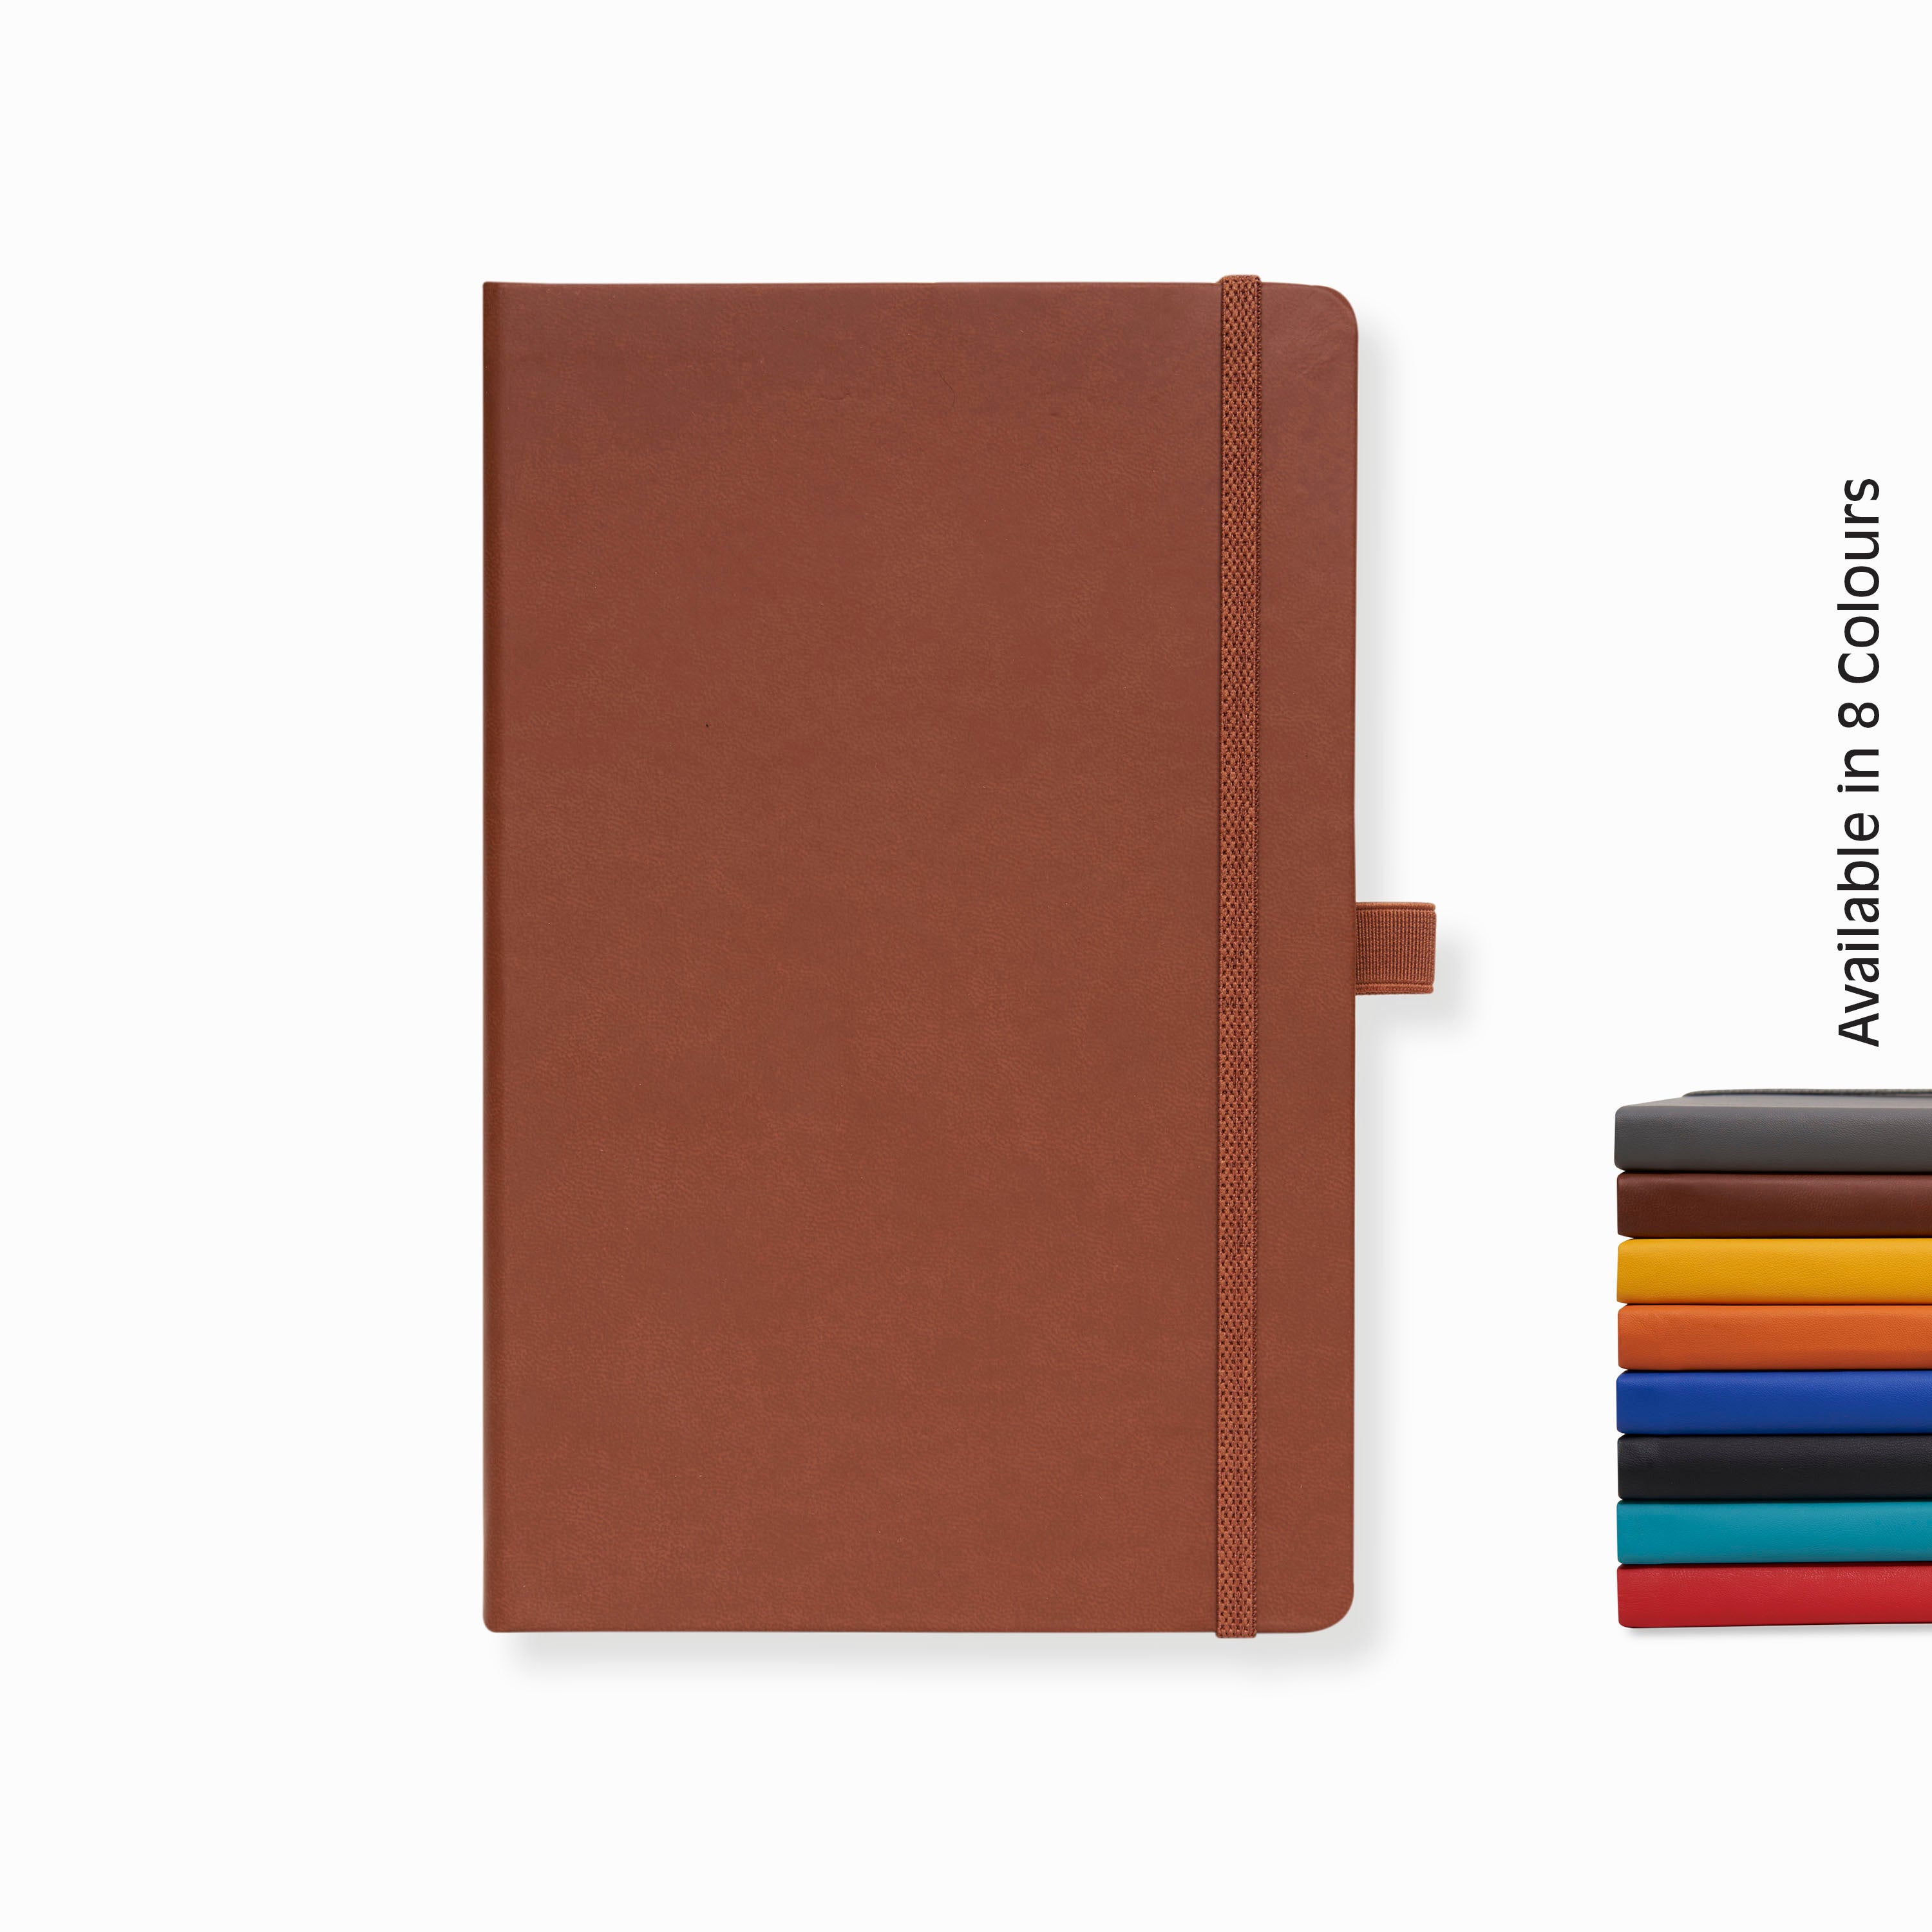 Doodle Pro Series Executive A5 PU Leather Hardbound Ruled Diary with Pen Loop - Brown